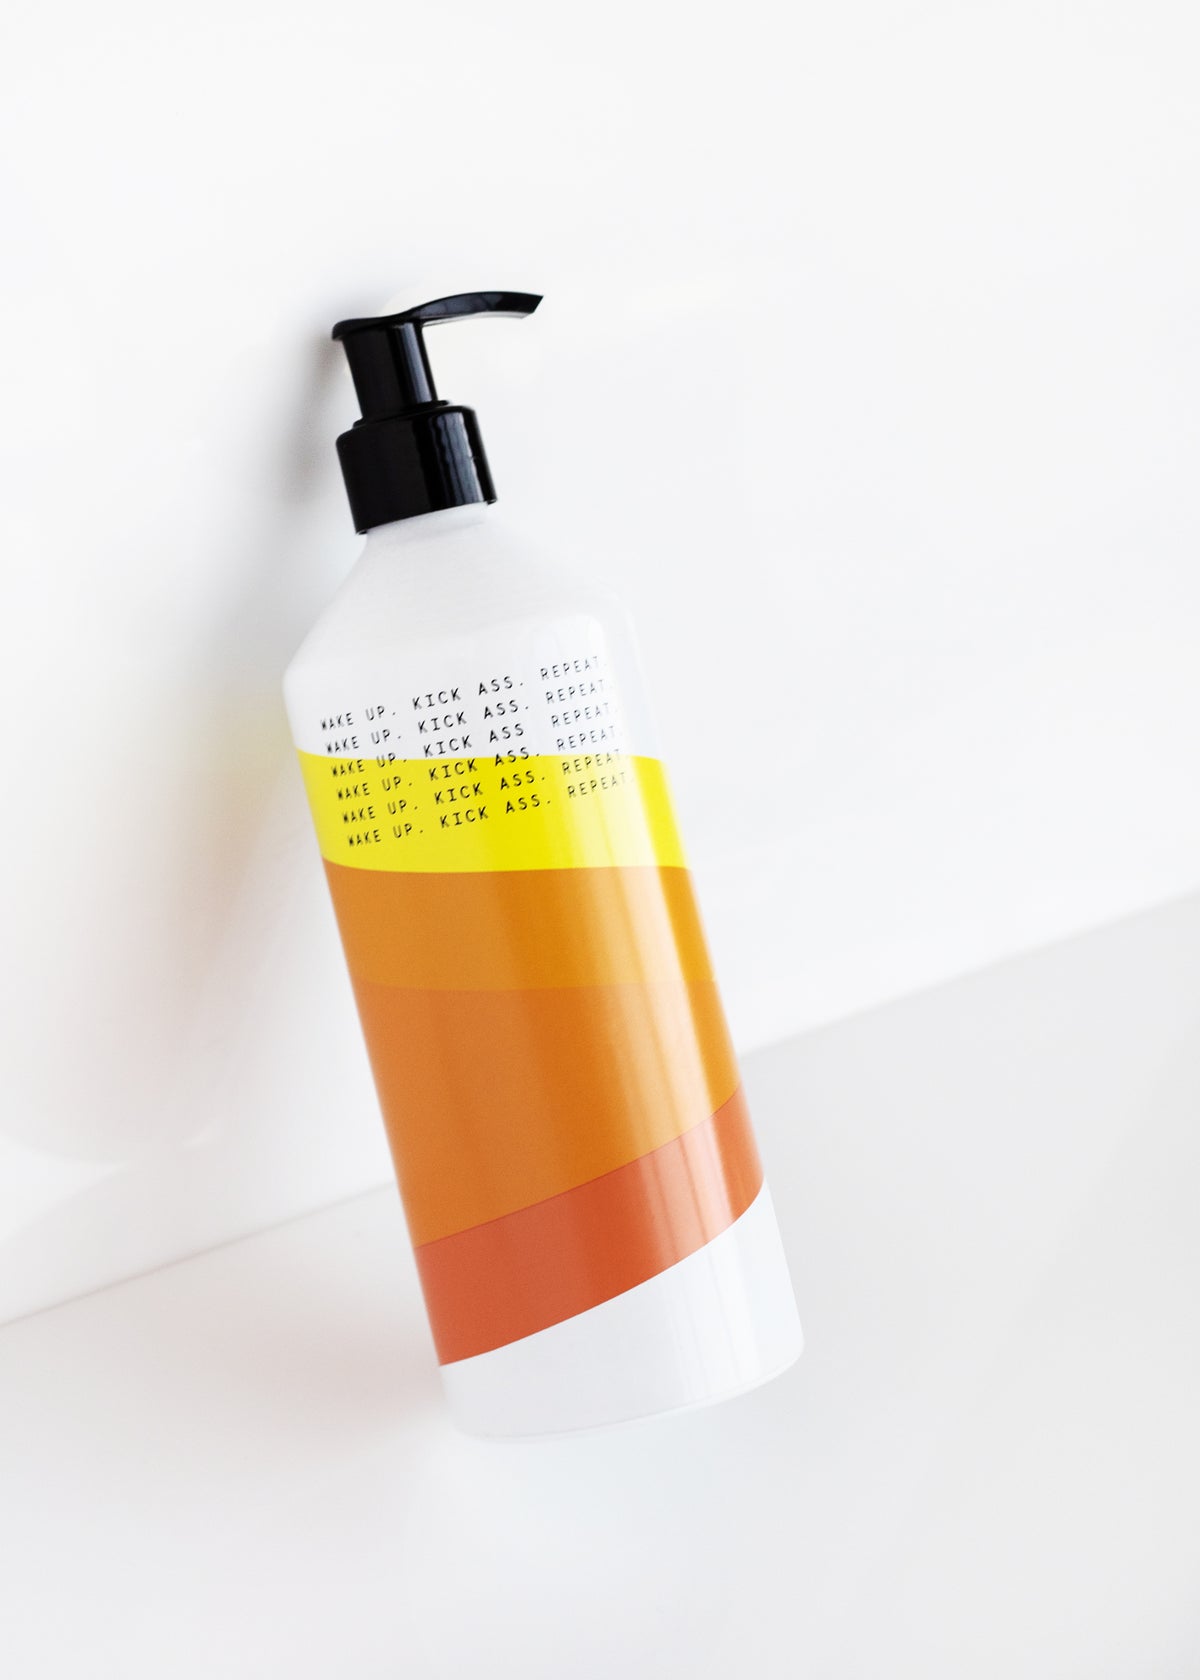 A Margot Elena dispenser bottle with a pump, featuring colorful horizontal stripes in shades of yellow and orange with hints of orange blossom, set against a plain white background.